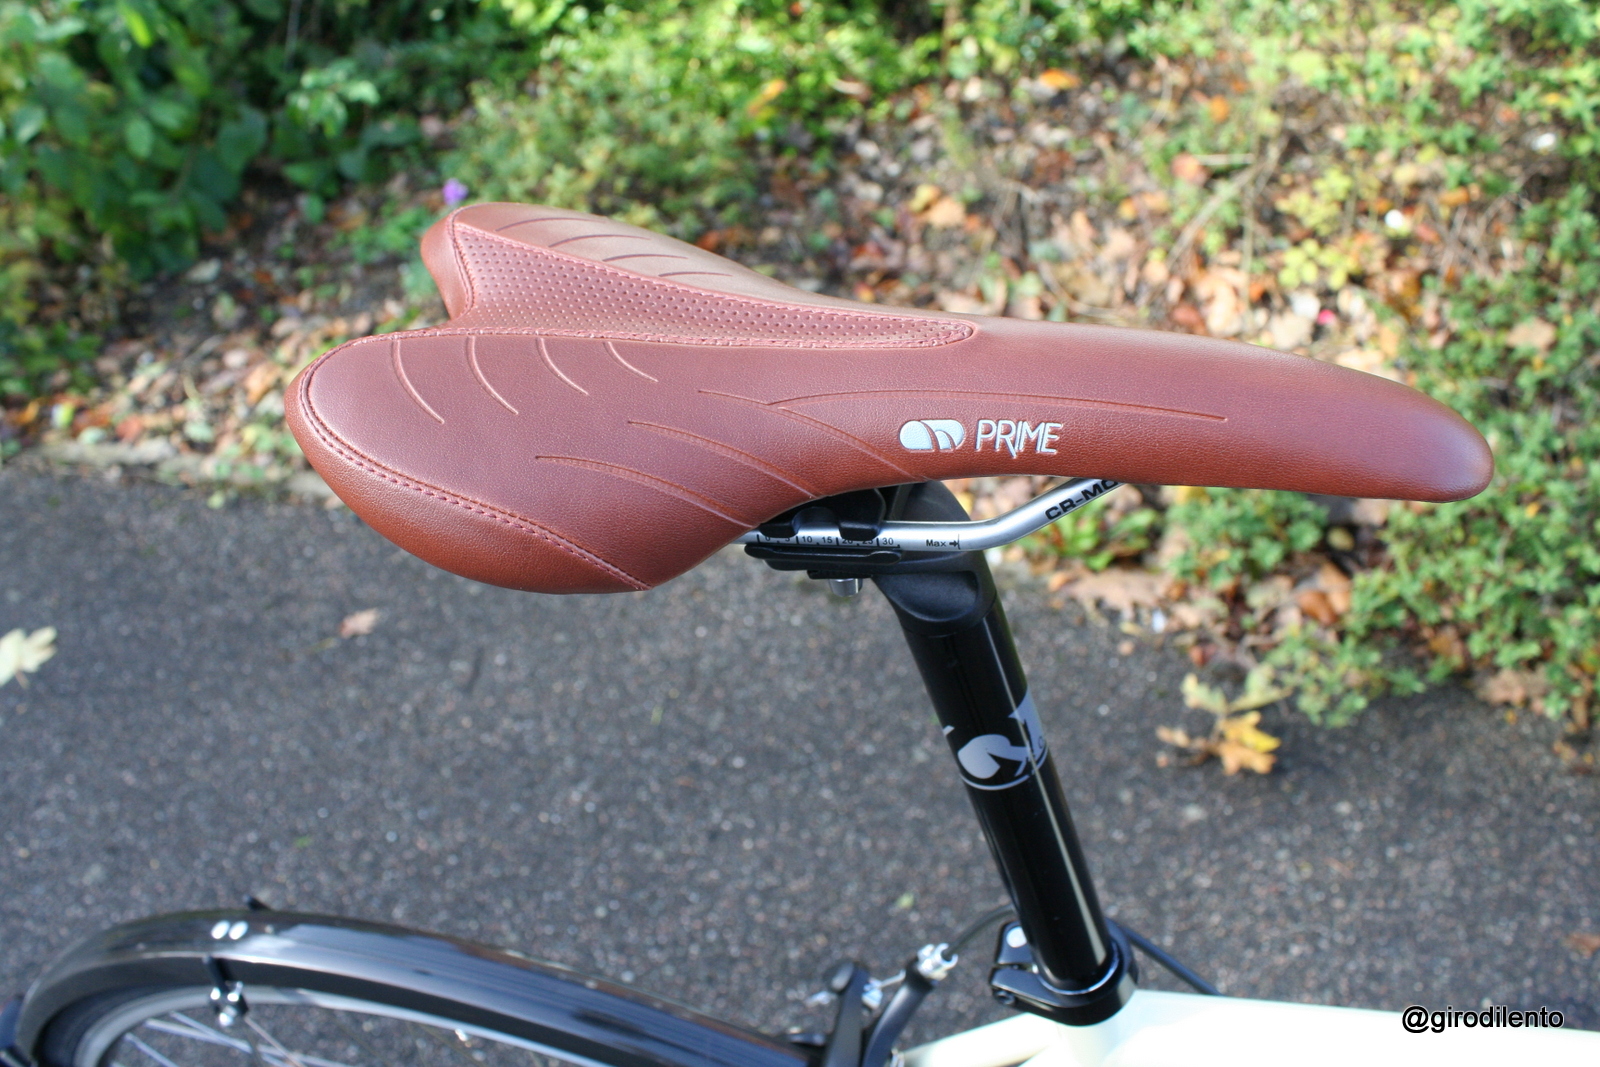 Madison Prime Saddle - first impressions are positive